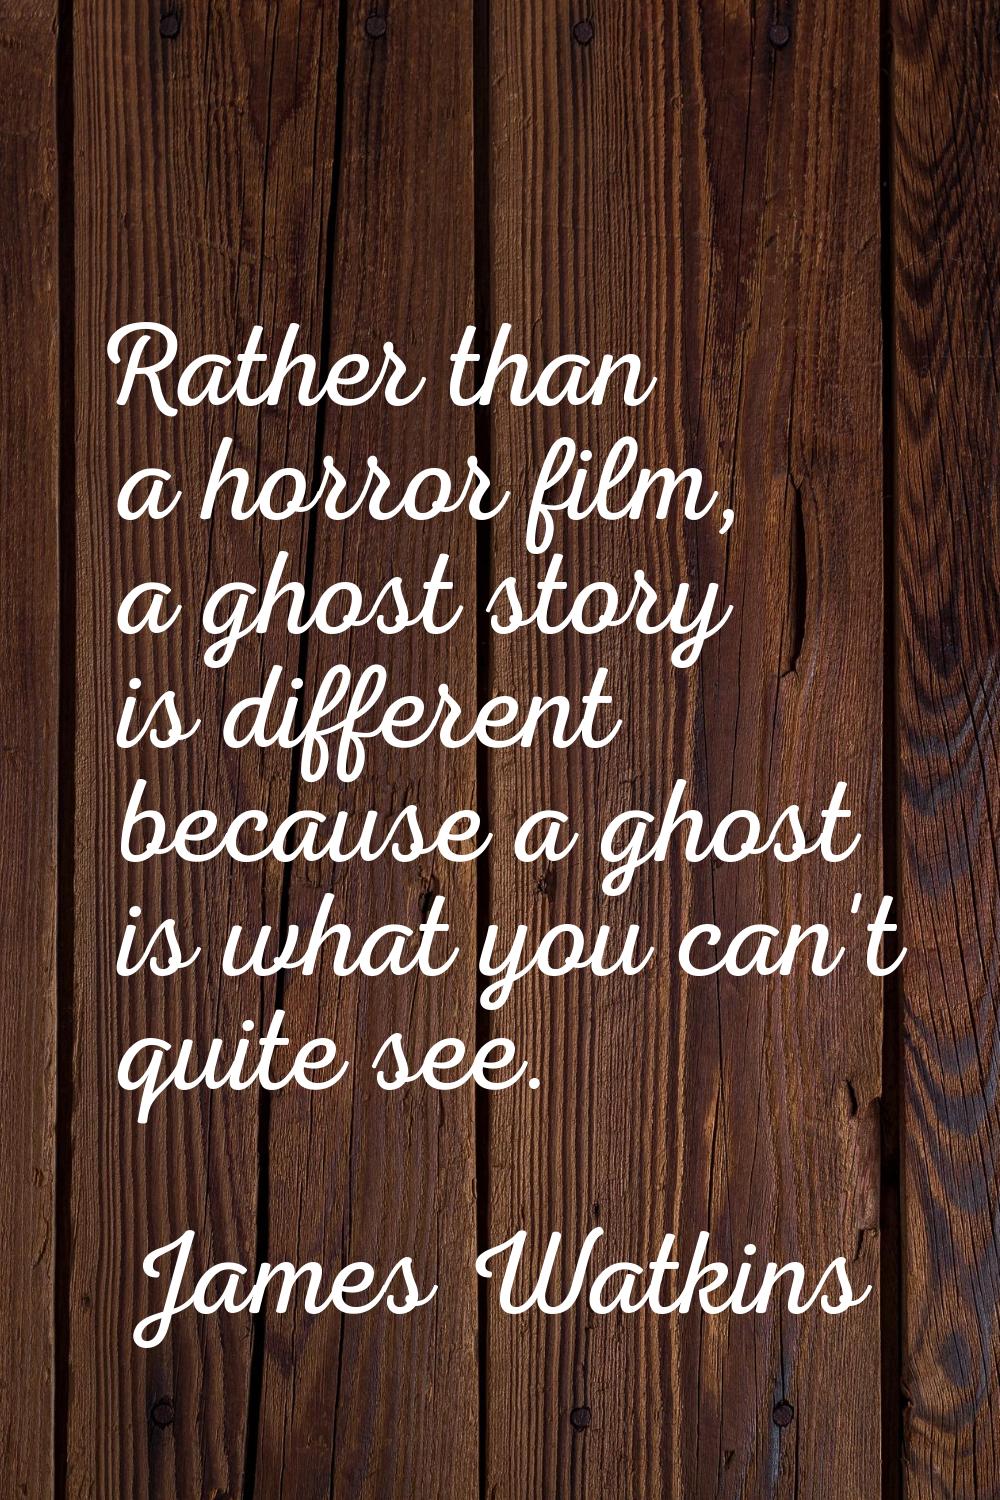 Rather than a horror film, a ghost story is different because a ghost is what you can't quite see.